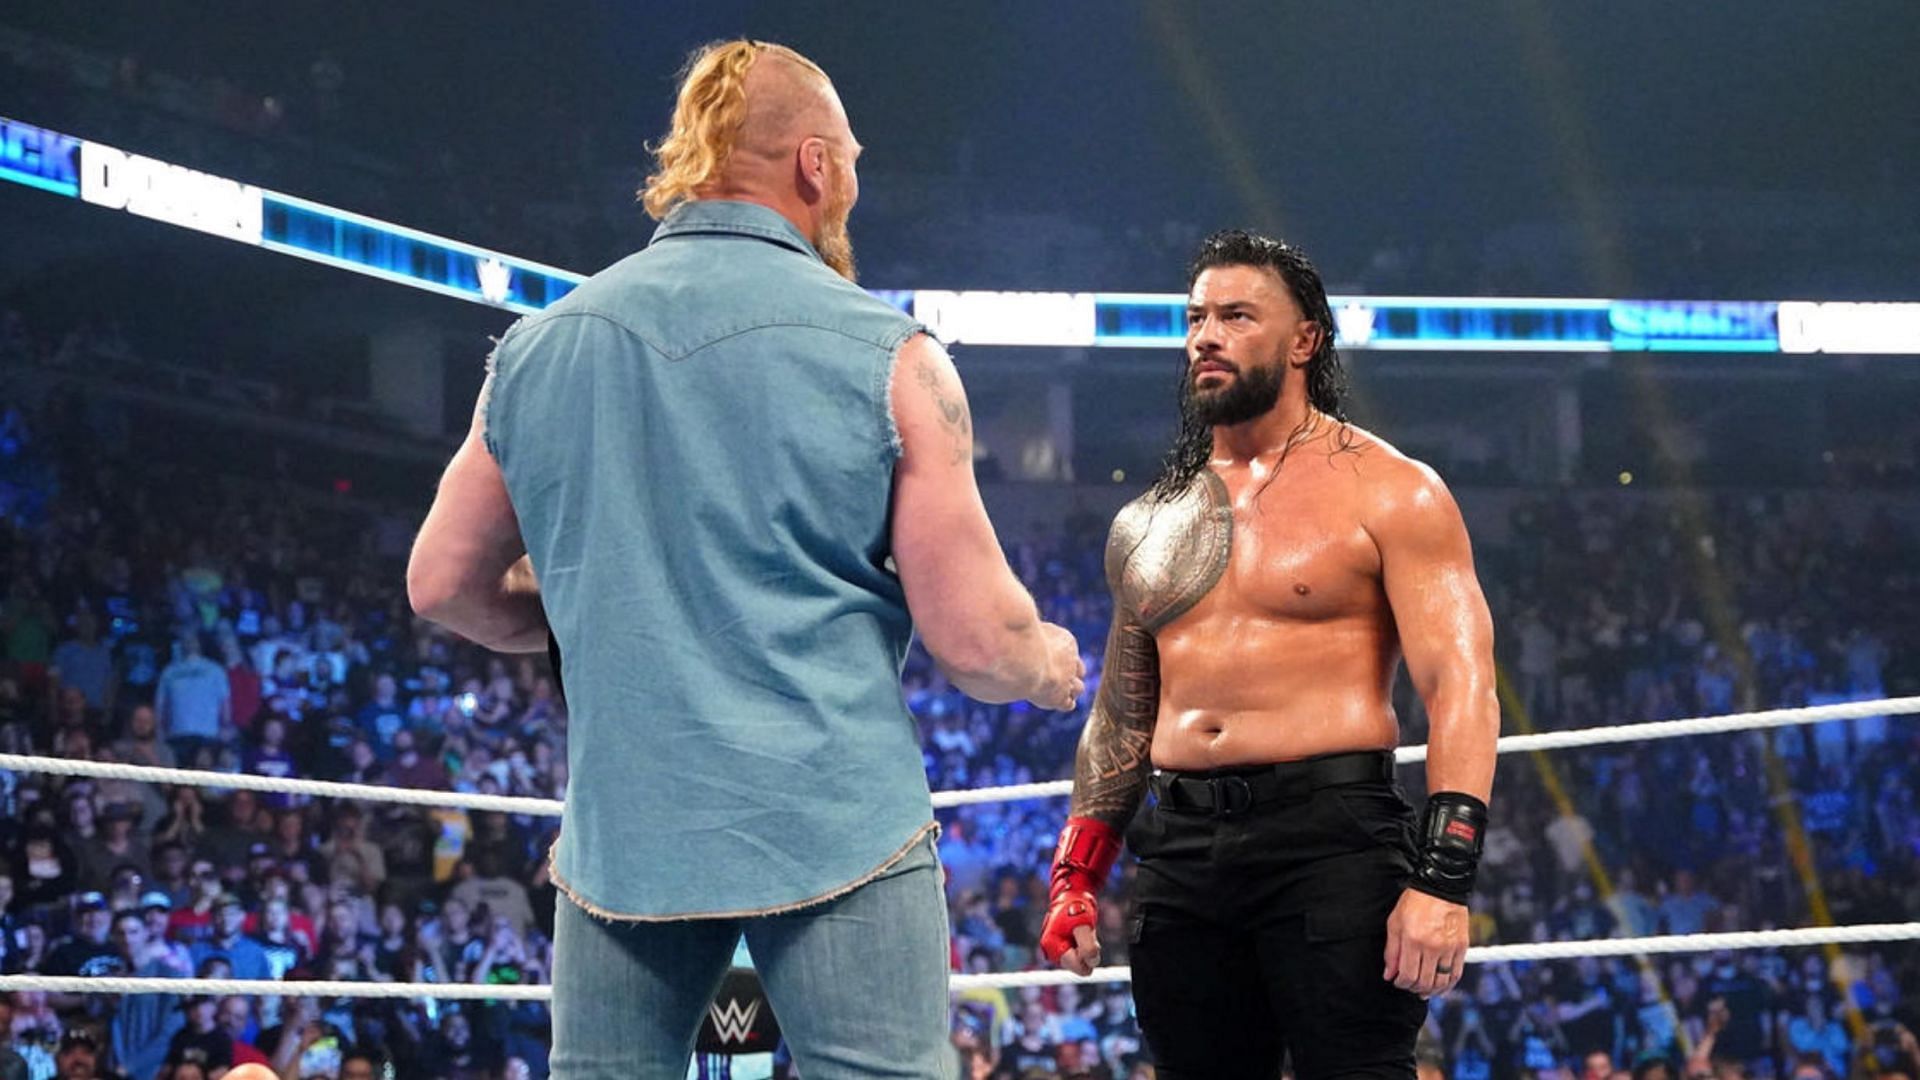 Brock Lesnar hit Roman Reigns with an F5 on SmackDown!